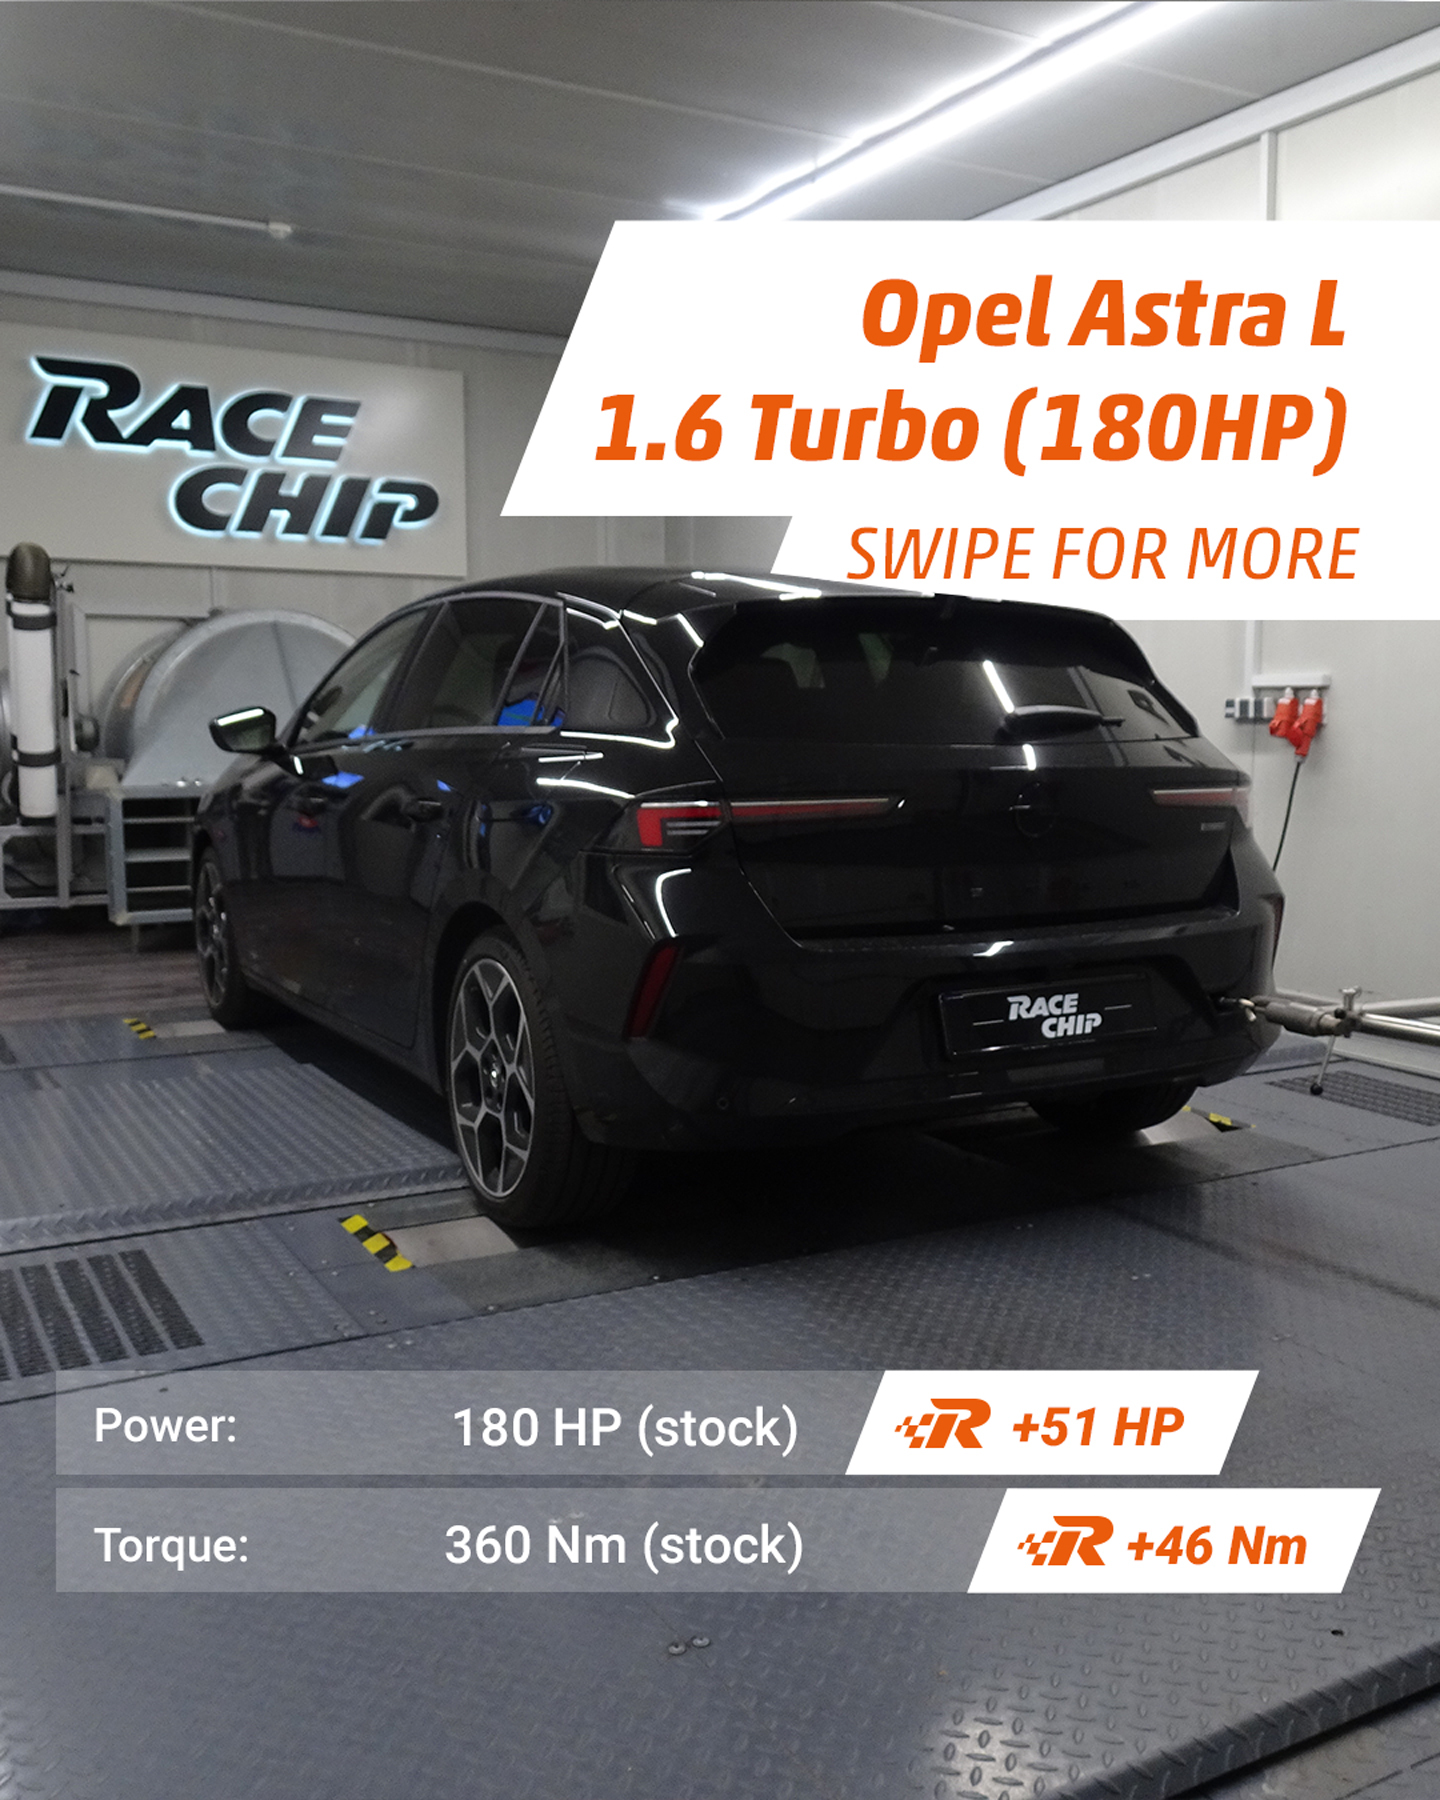 Chiptuning for Opel - Engine Tuning by RaceChip